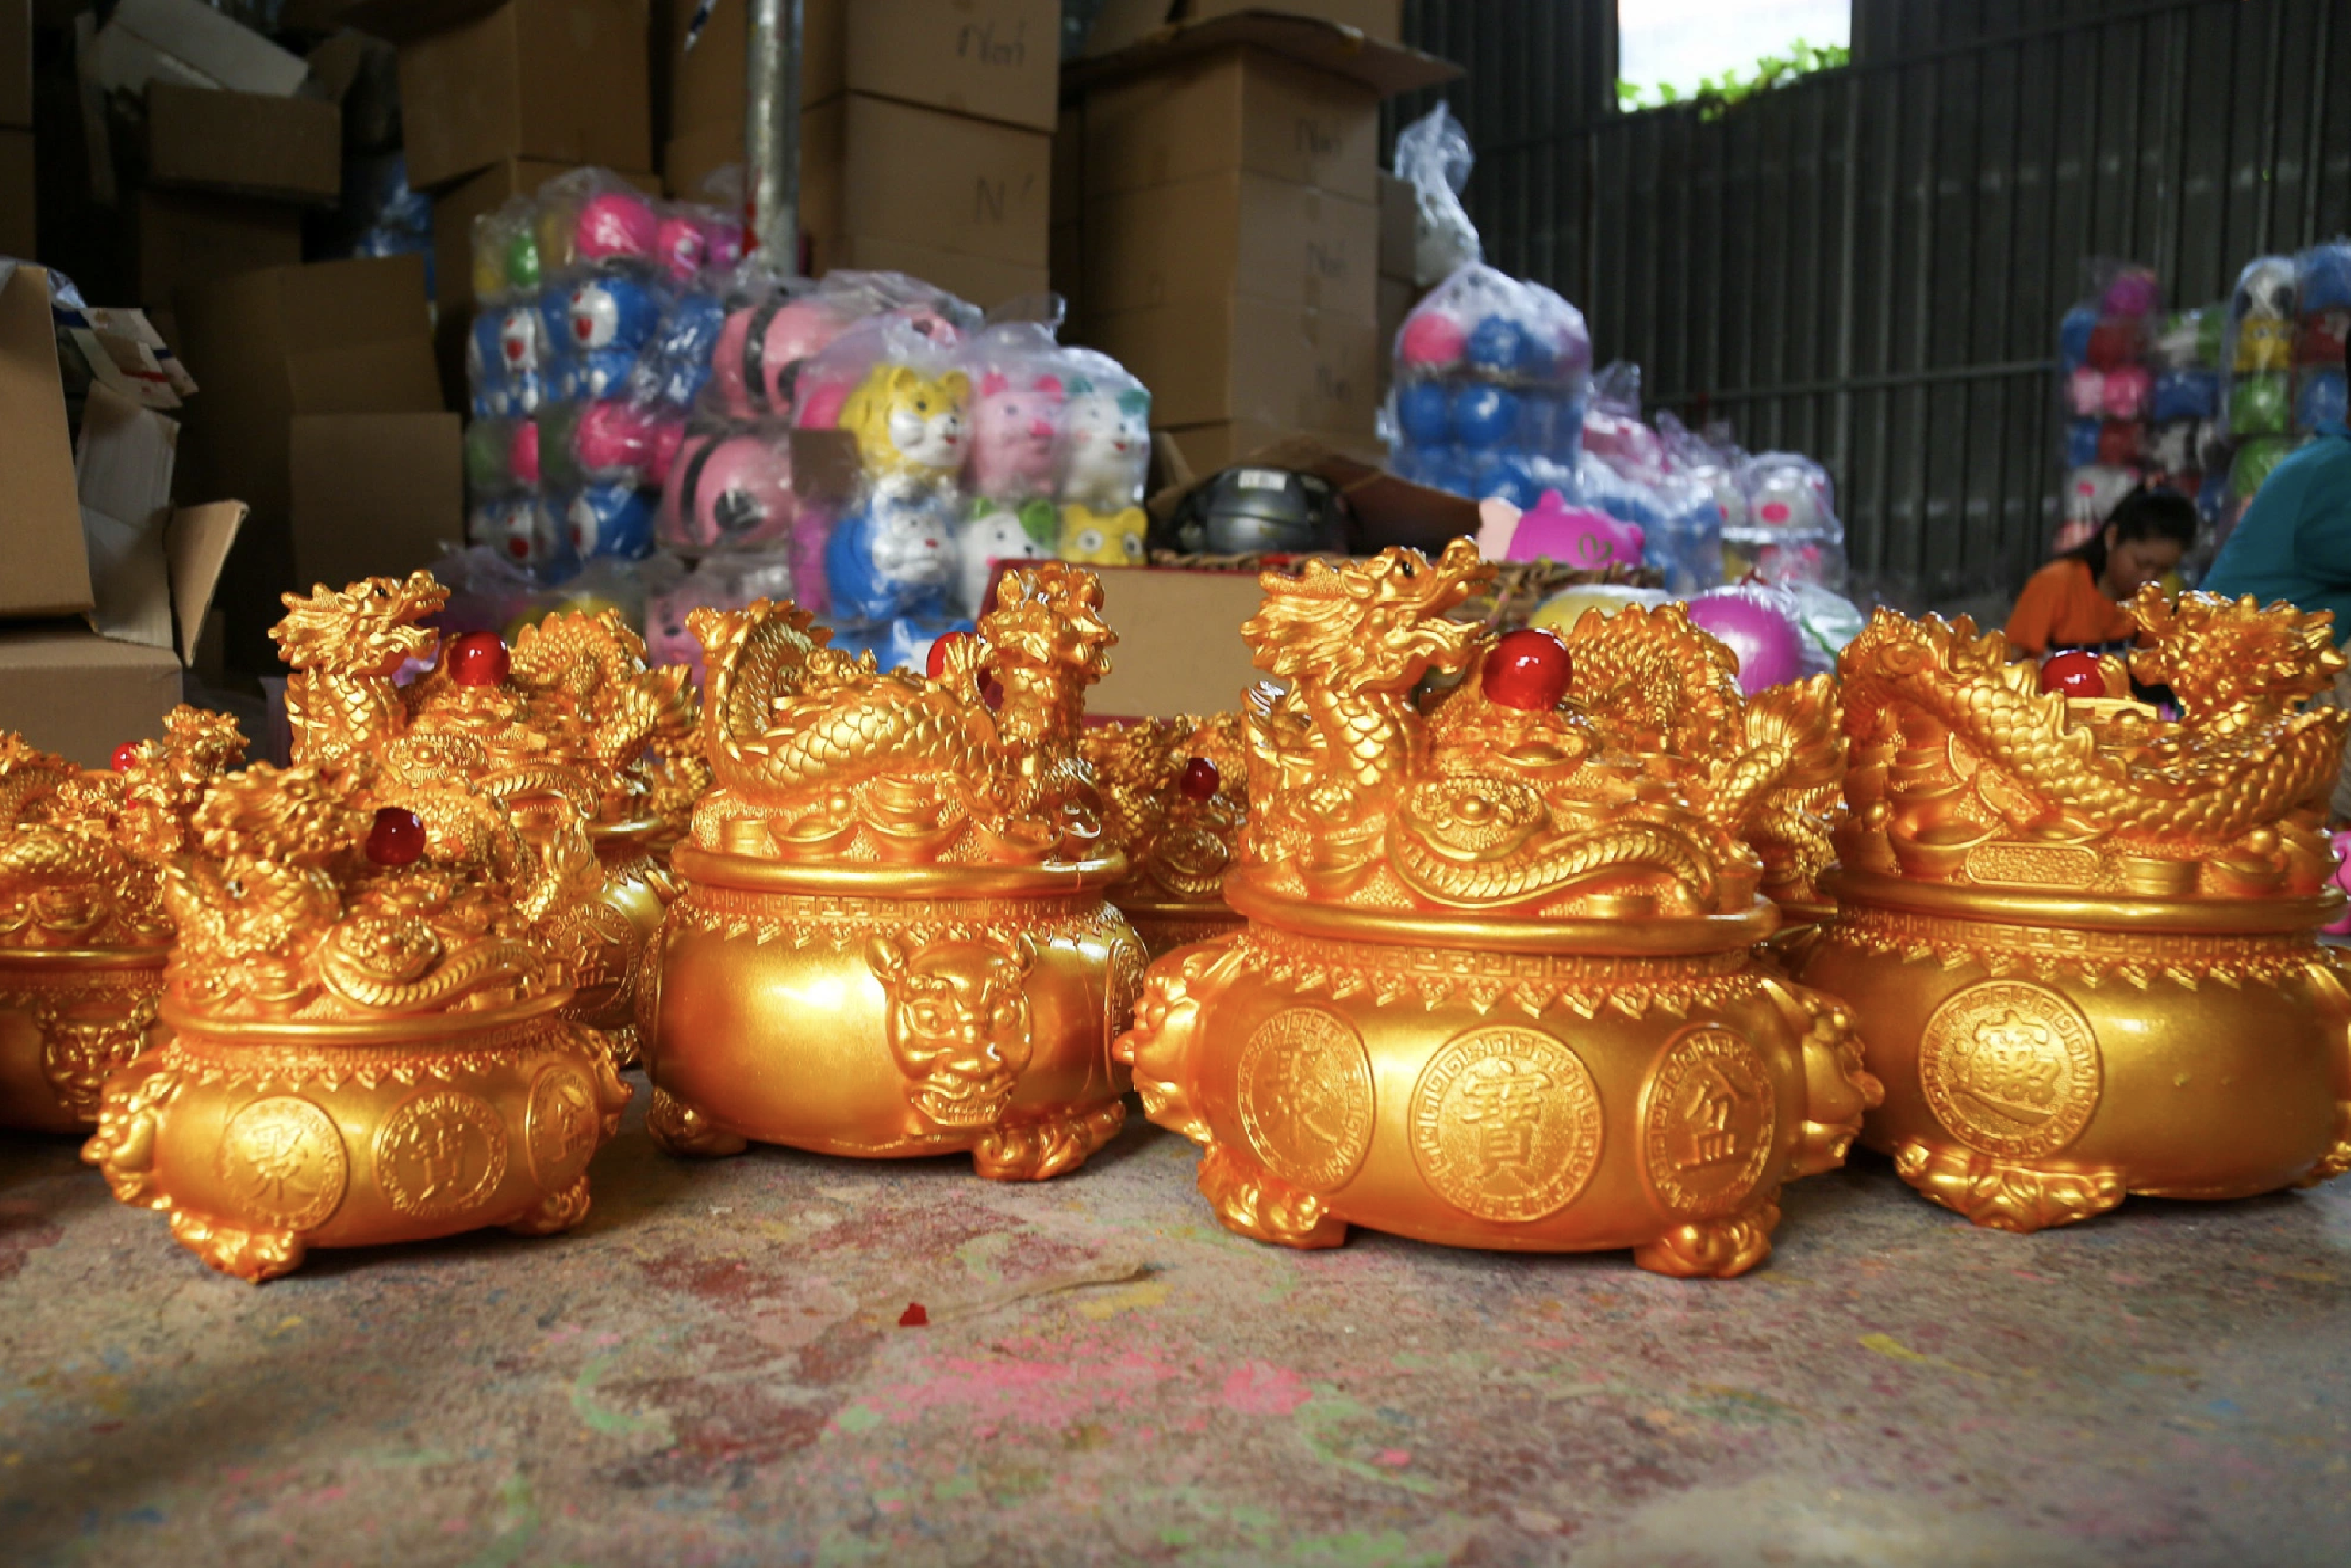 Artisans in the village paint dragon-shaped piggy banks yellow to make them suitable for display during Tet with the symbol of attracting luck and fortune. Photo: P.Q. / Tuoi Tre